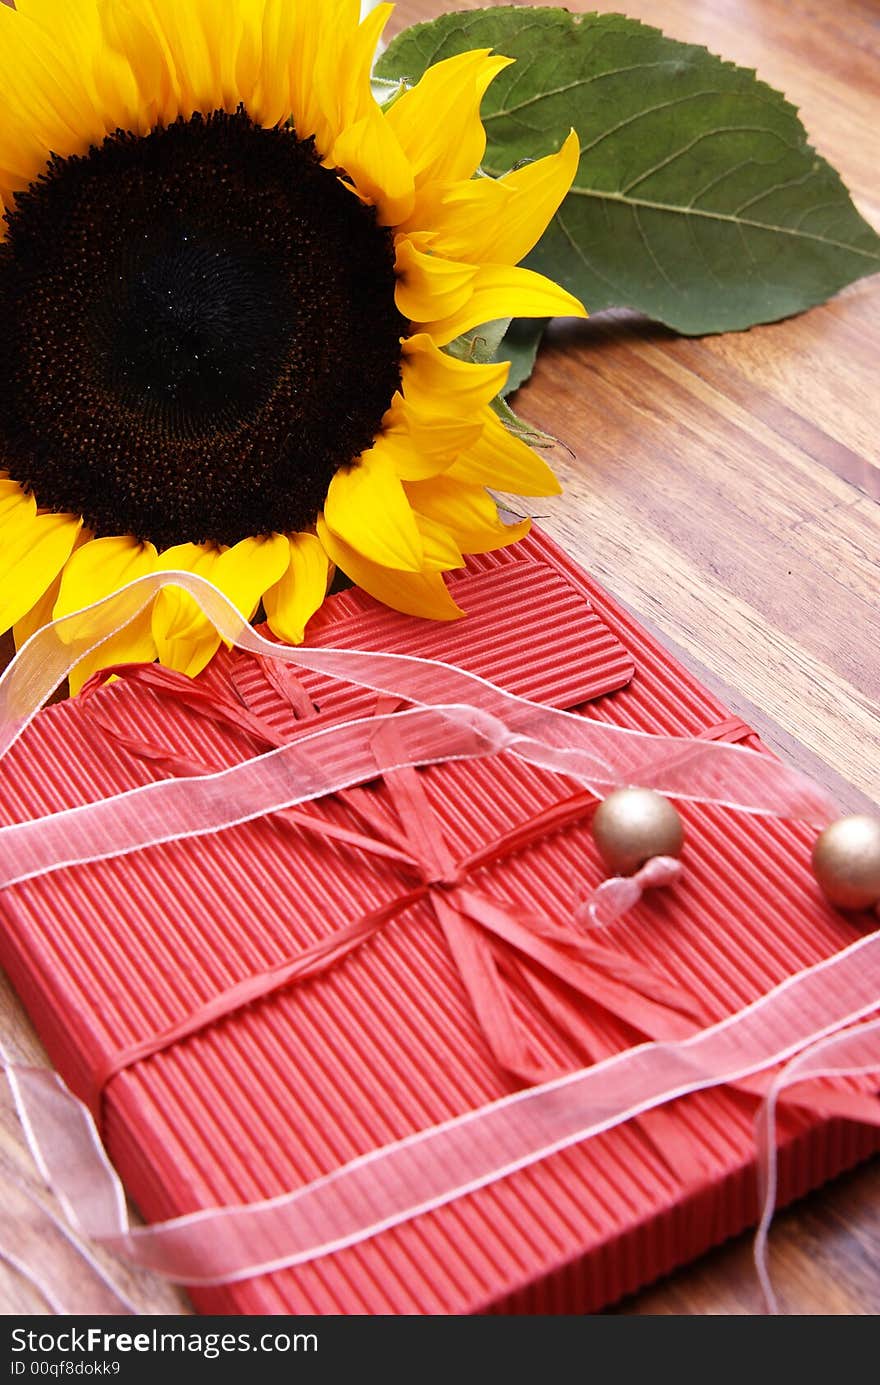 Sunflower, butterfly and a red box on a wooden table